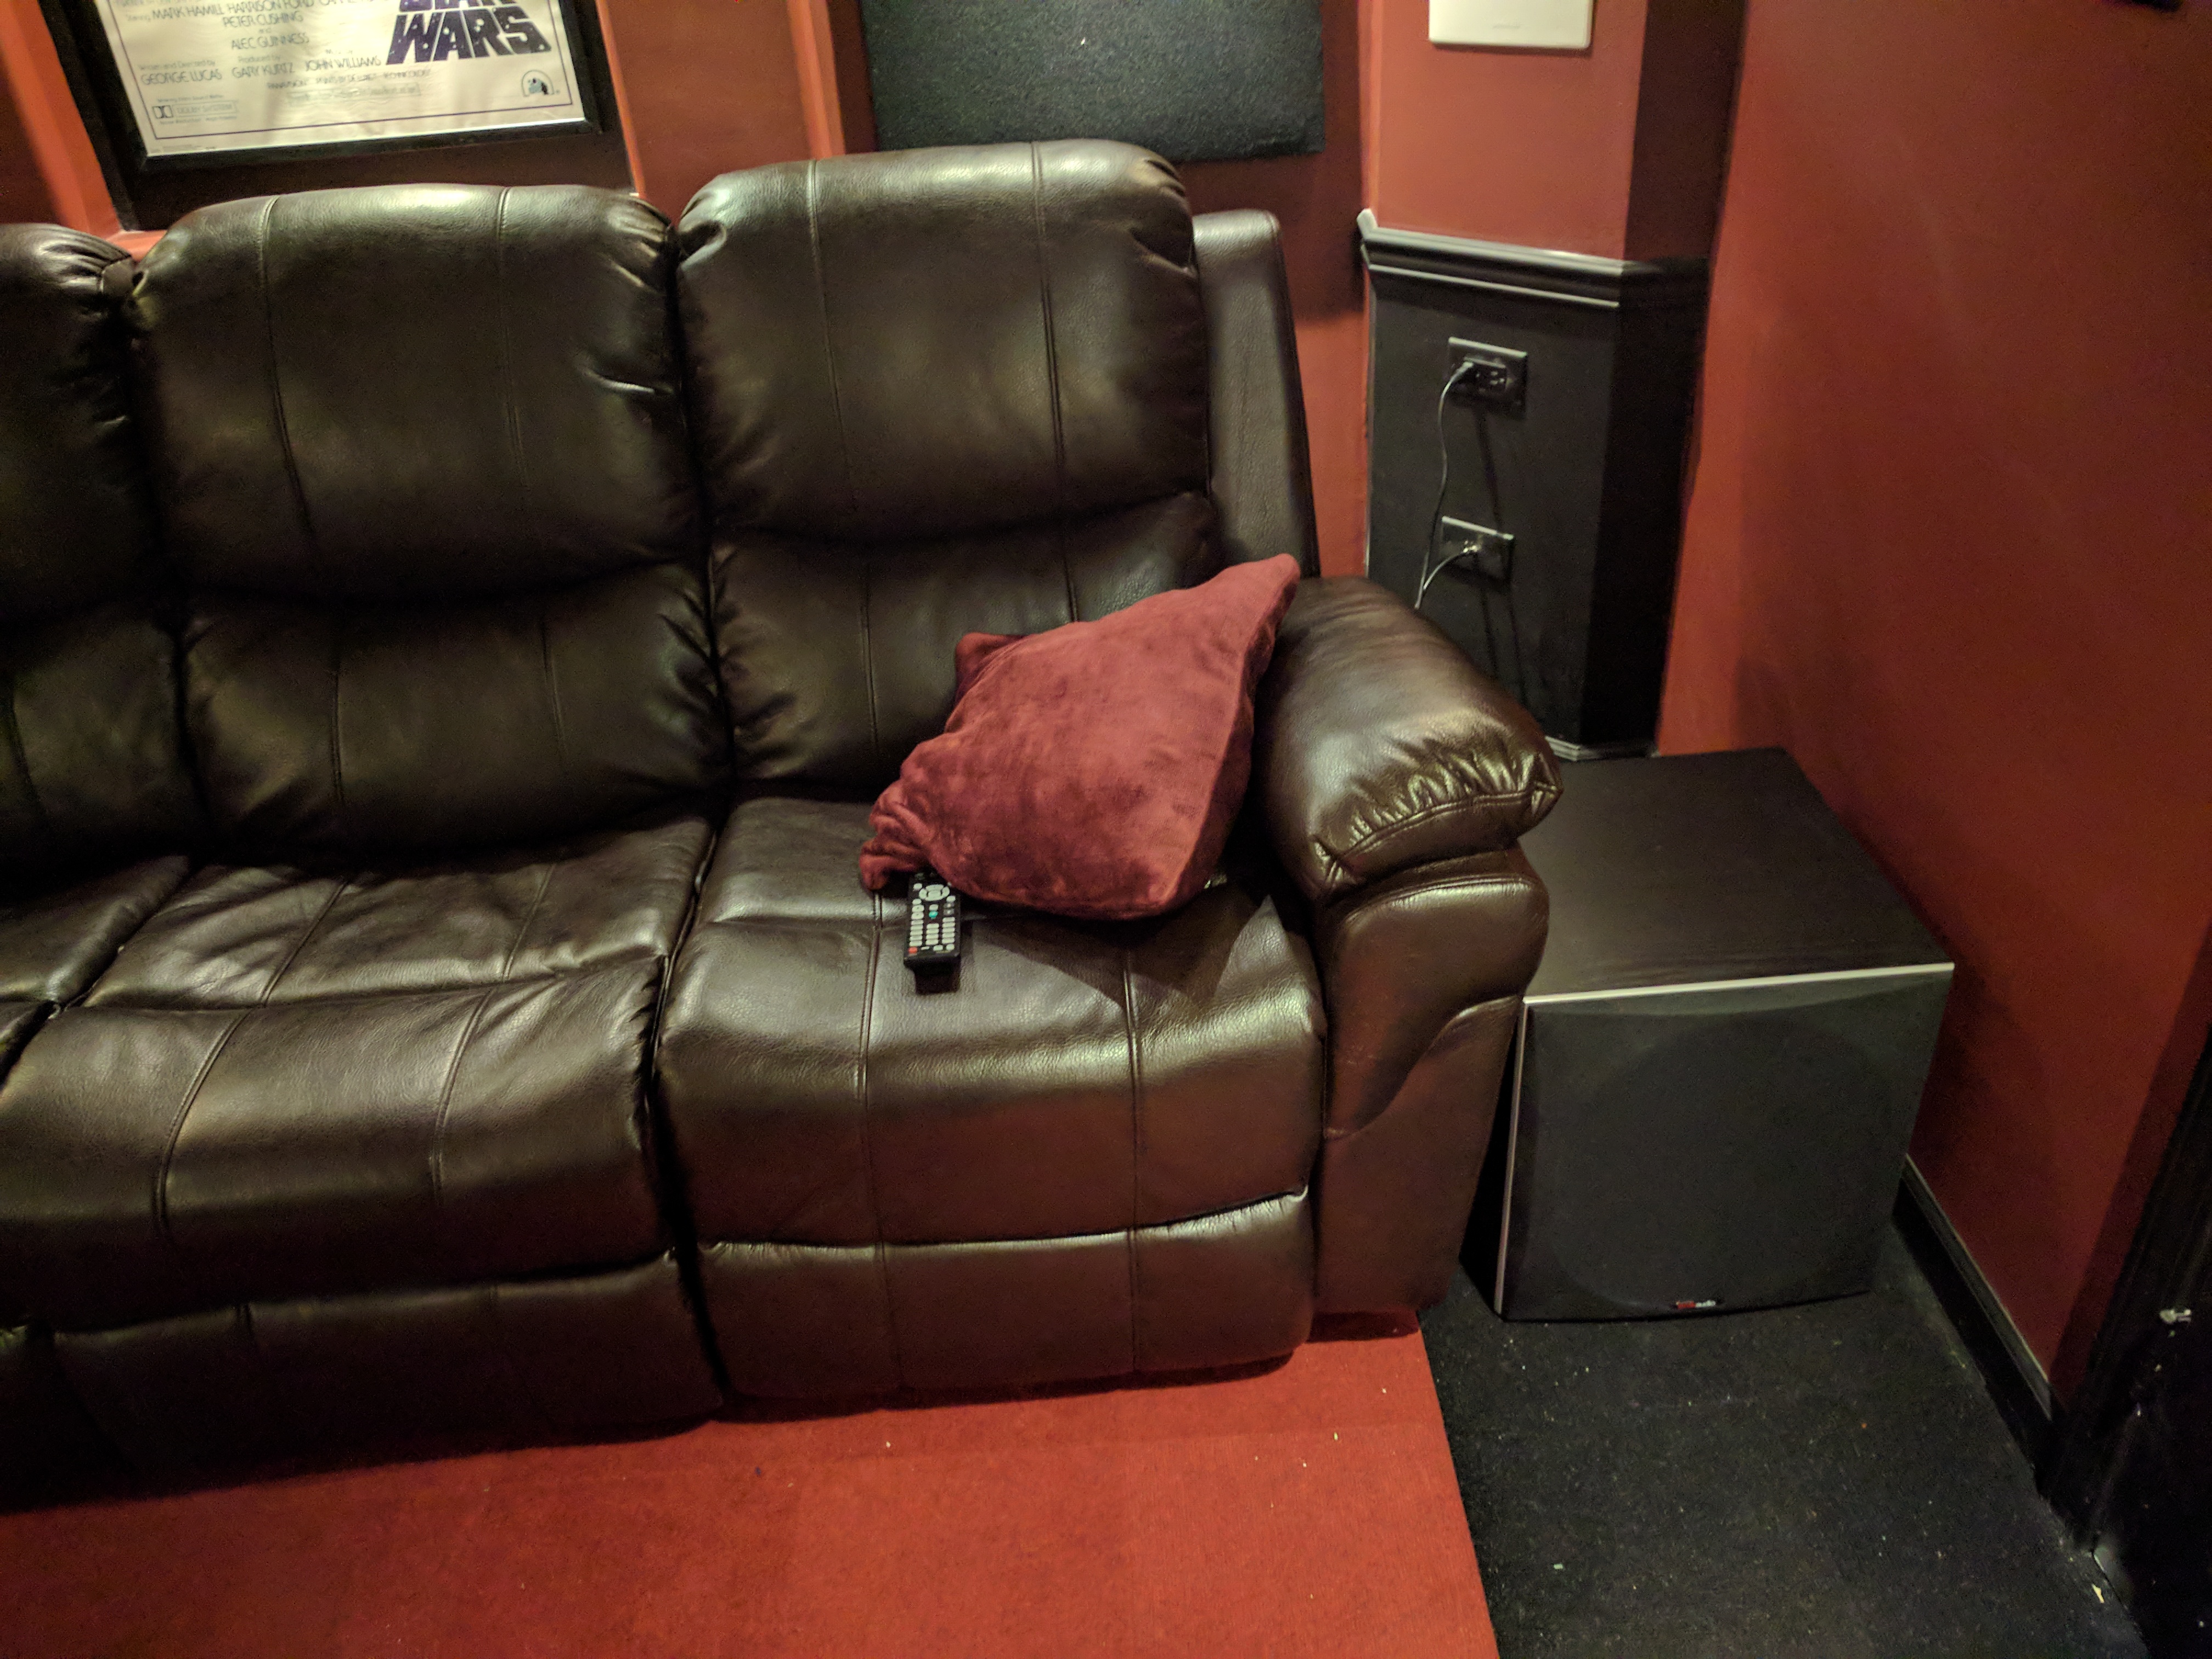 Subwoofer Placement | Home Theater Forum